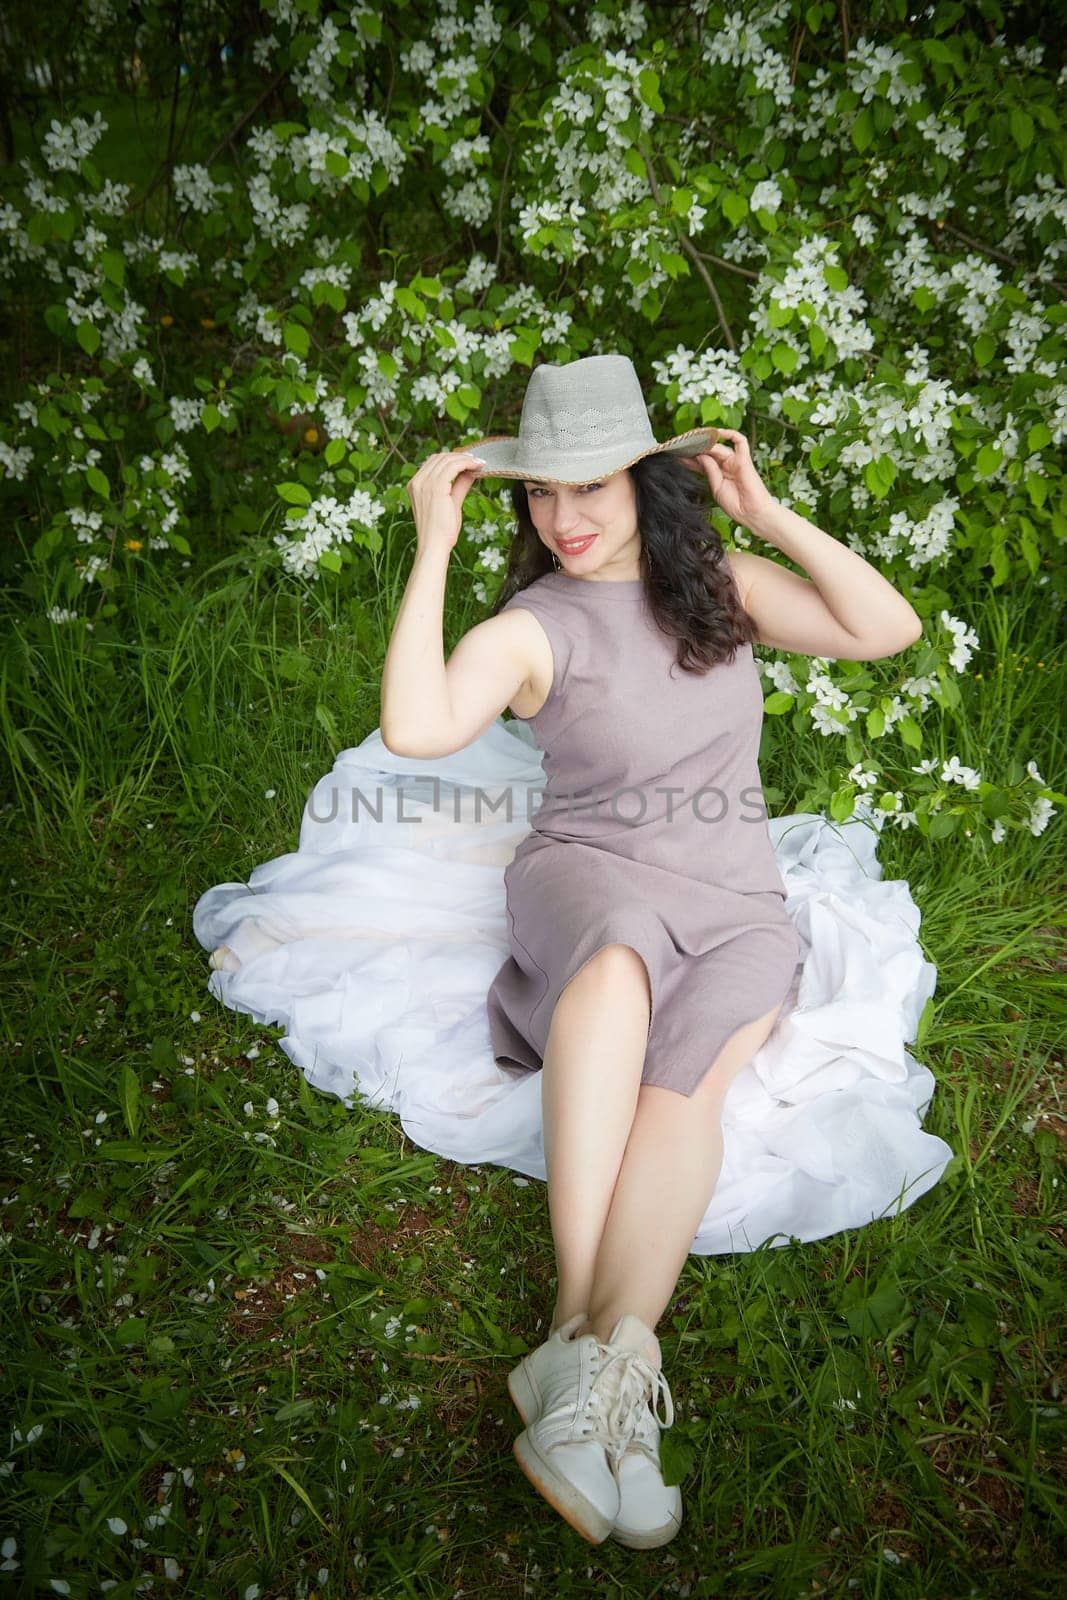 Elegant Woman Posing With Hat in Blossoming Garden. A smiling woman in a dress playfully tipping her hat among spring blossoms. The concept of fashion, self care by keleny